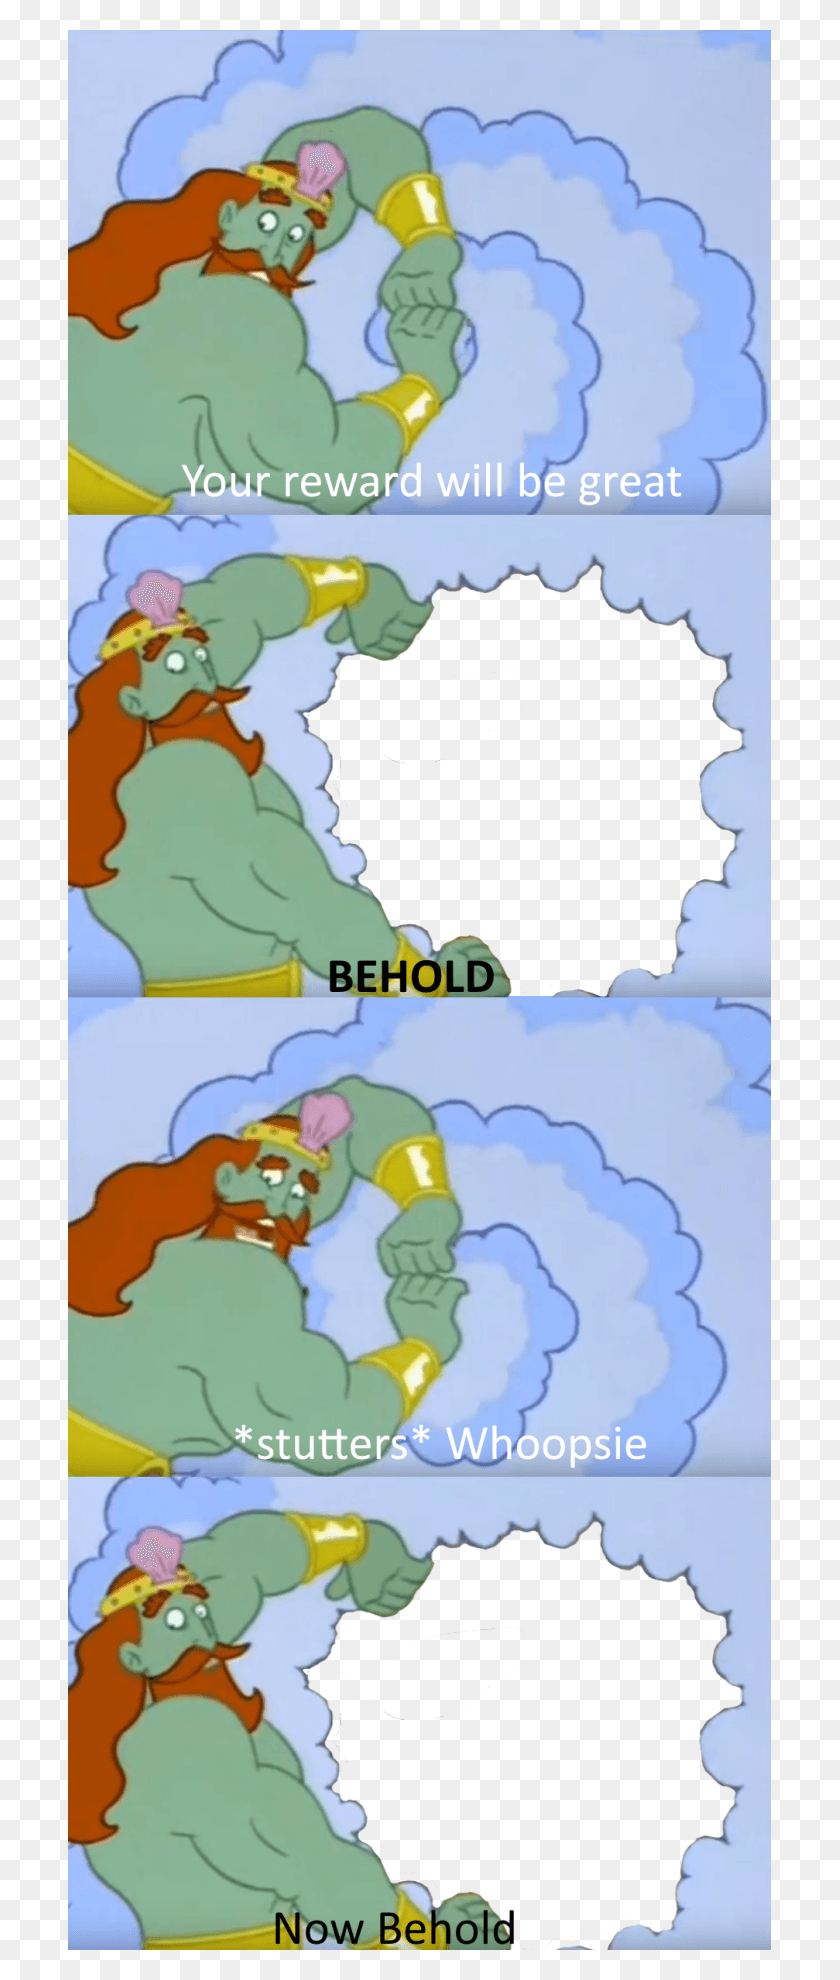 703x1920 Just Invented This I Believe This Format Has Some Potential Your Reward Will Be Great Template, Super Mario, Plot, Map HD PNG Download